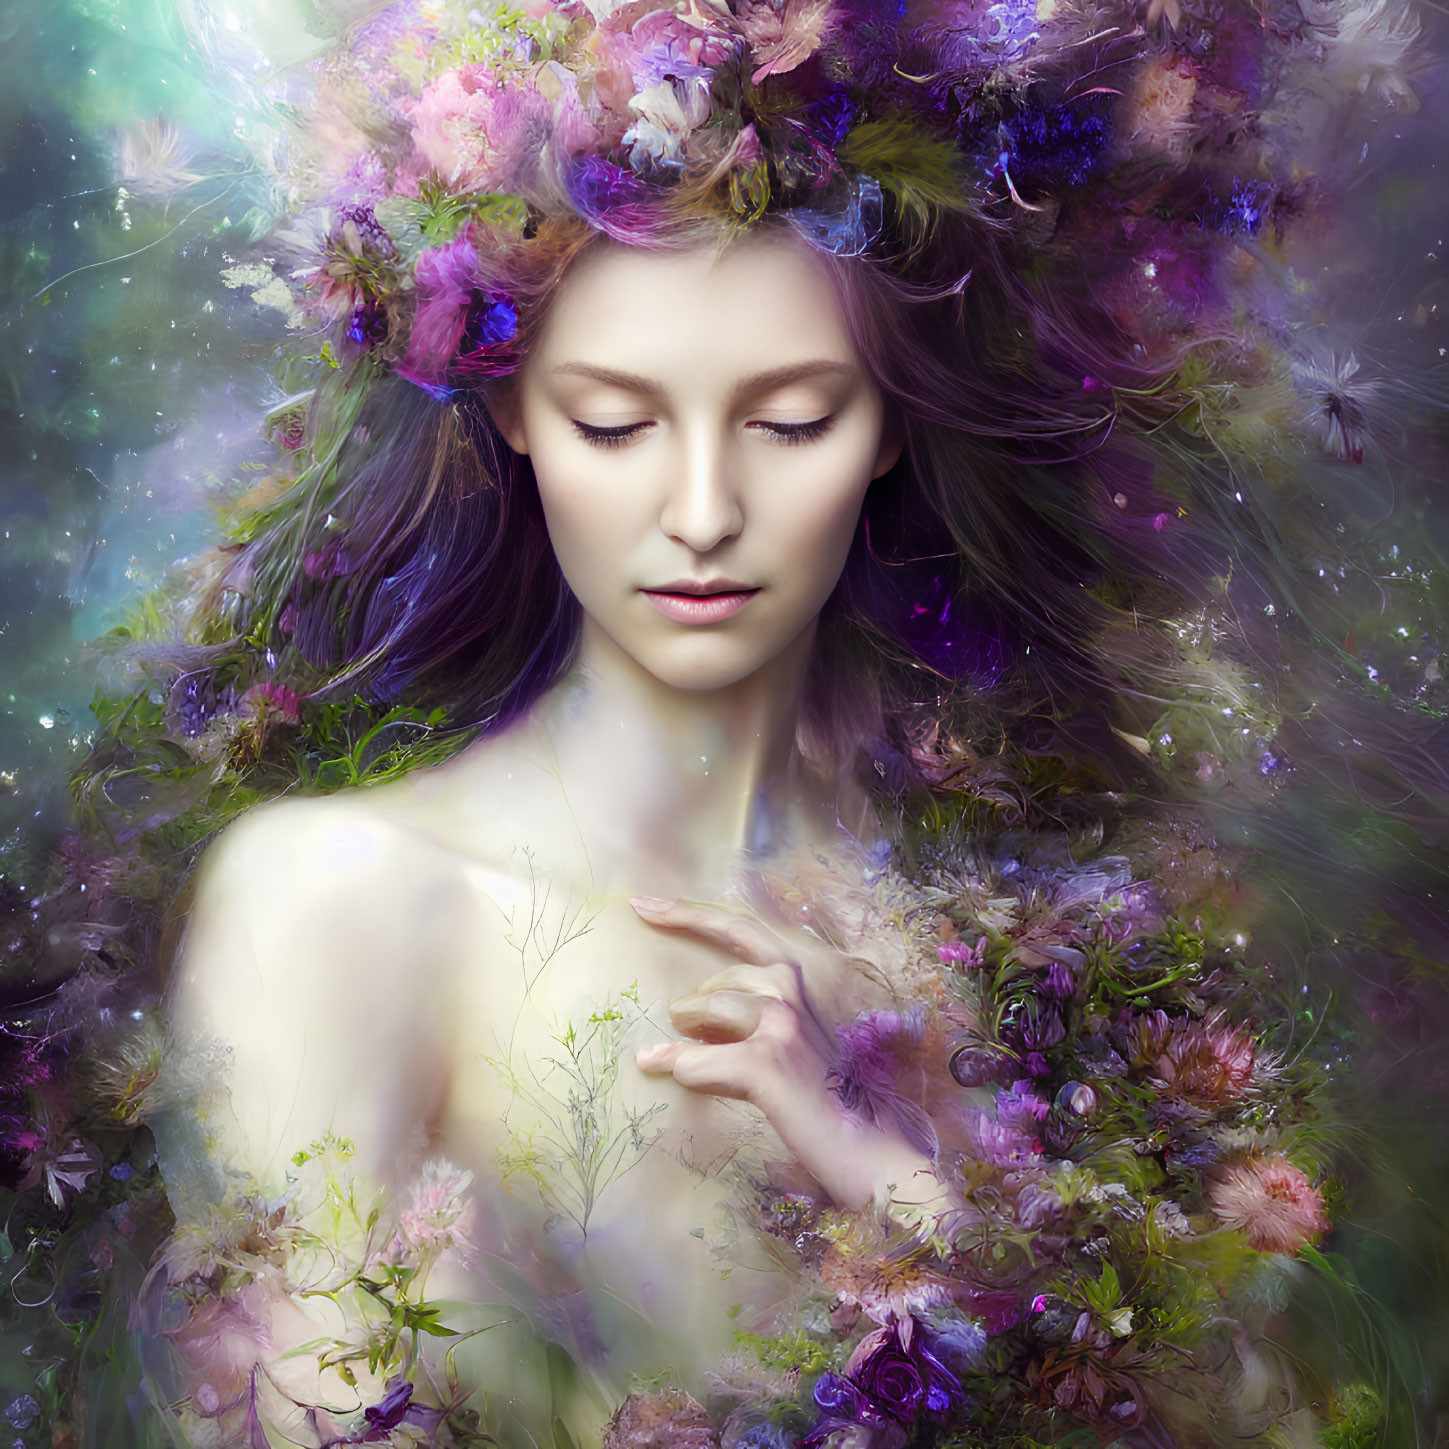 Serene woman with vibrant floral adornment in dreamy cosmic setting